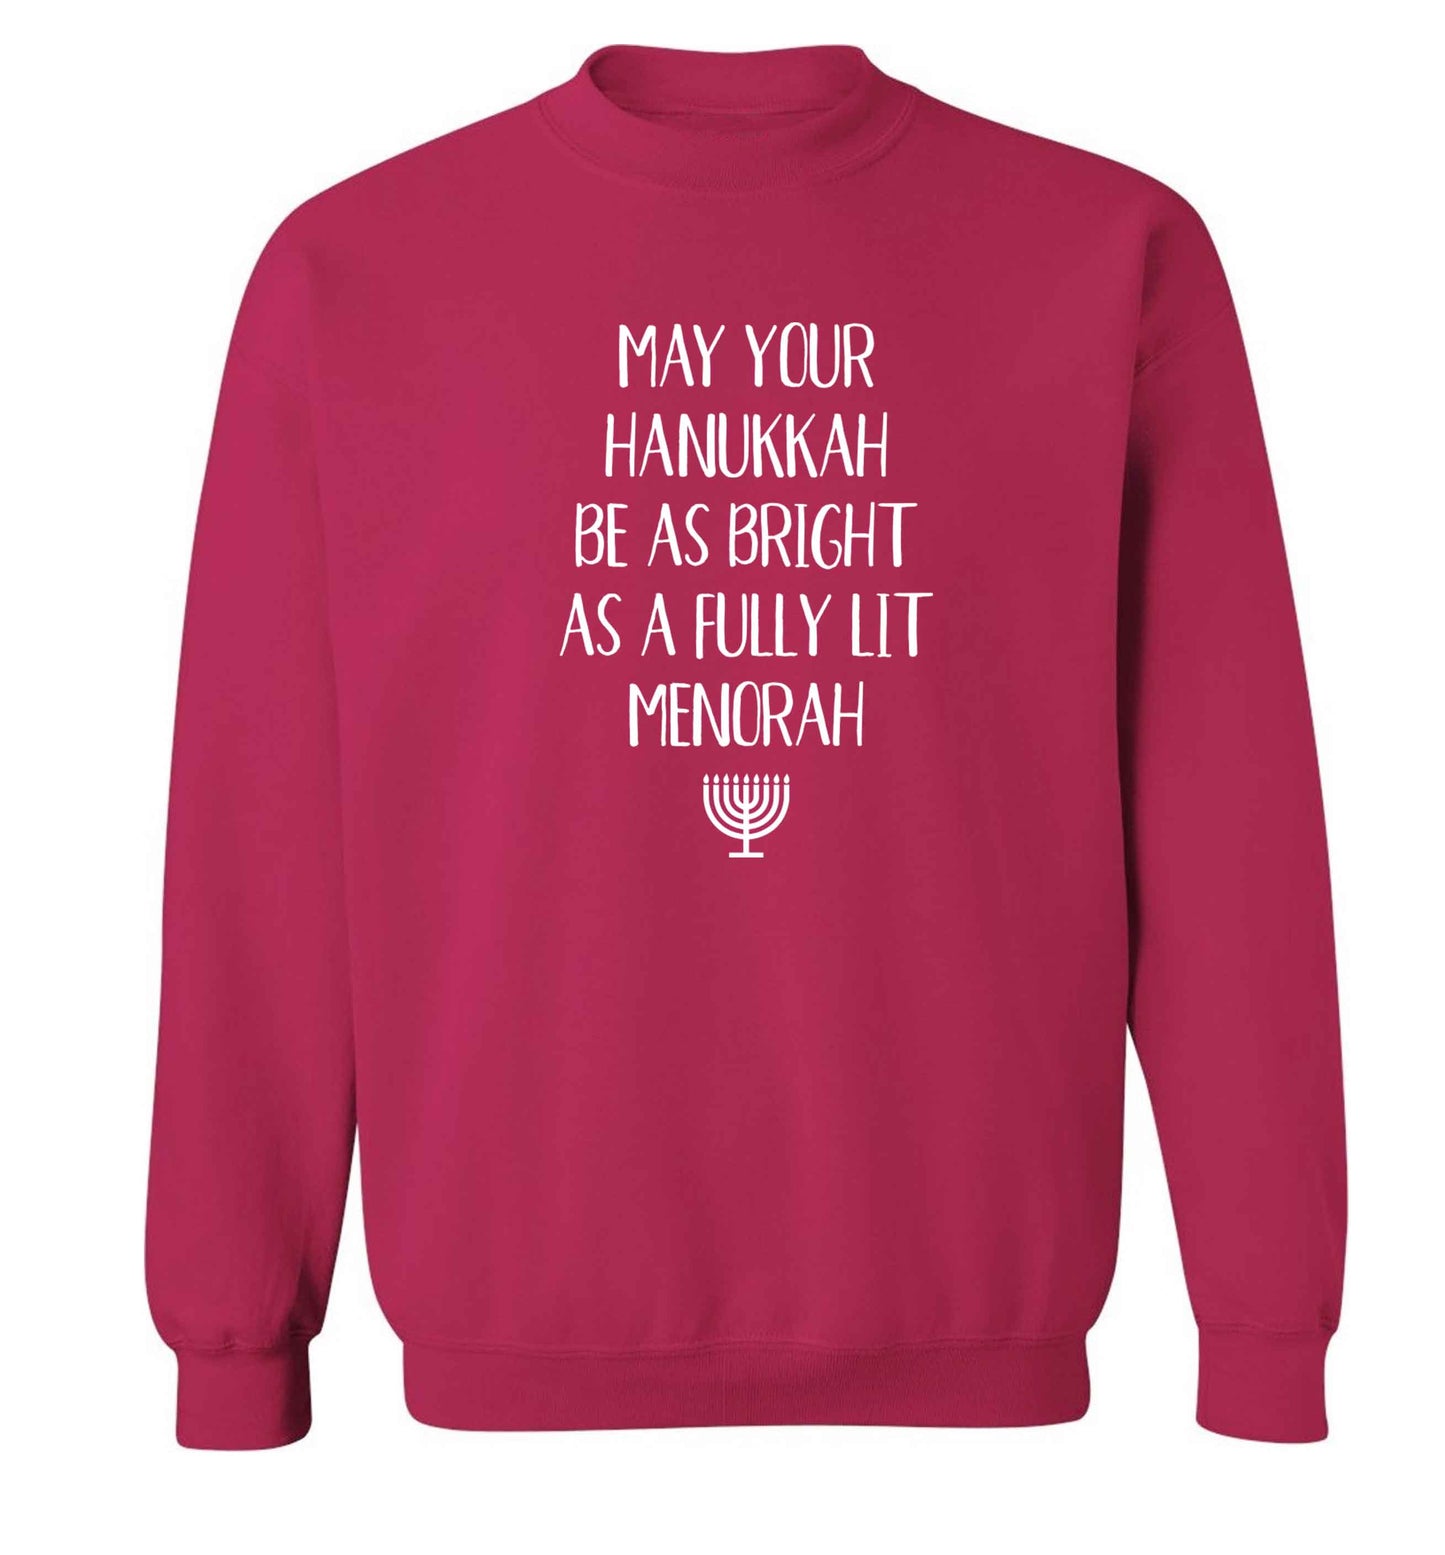 May your hanukkah be as bright as a fully lit menorah Adult's unisex pink Sweater 2XL